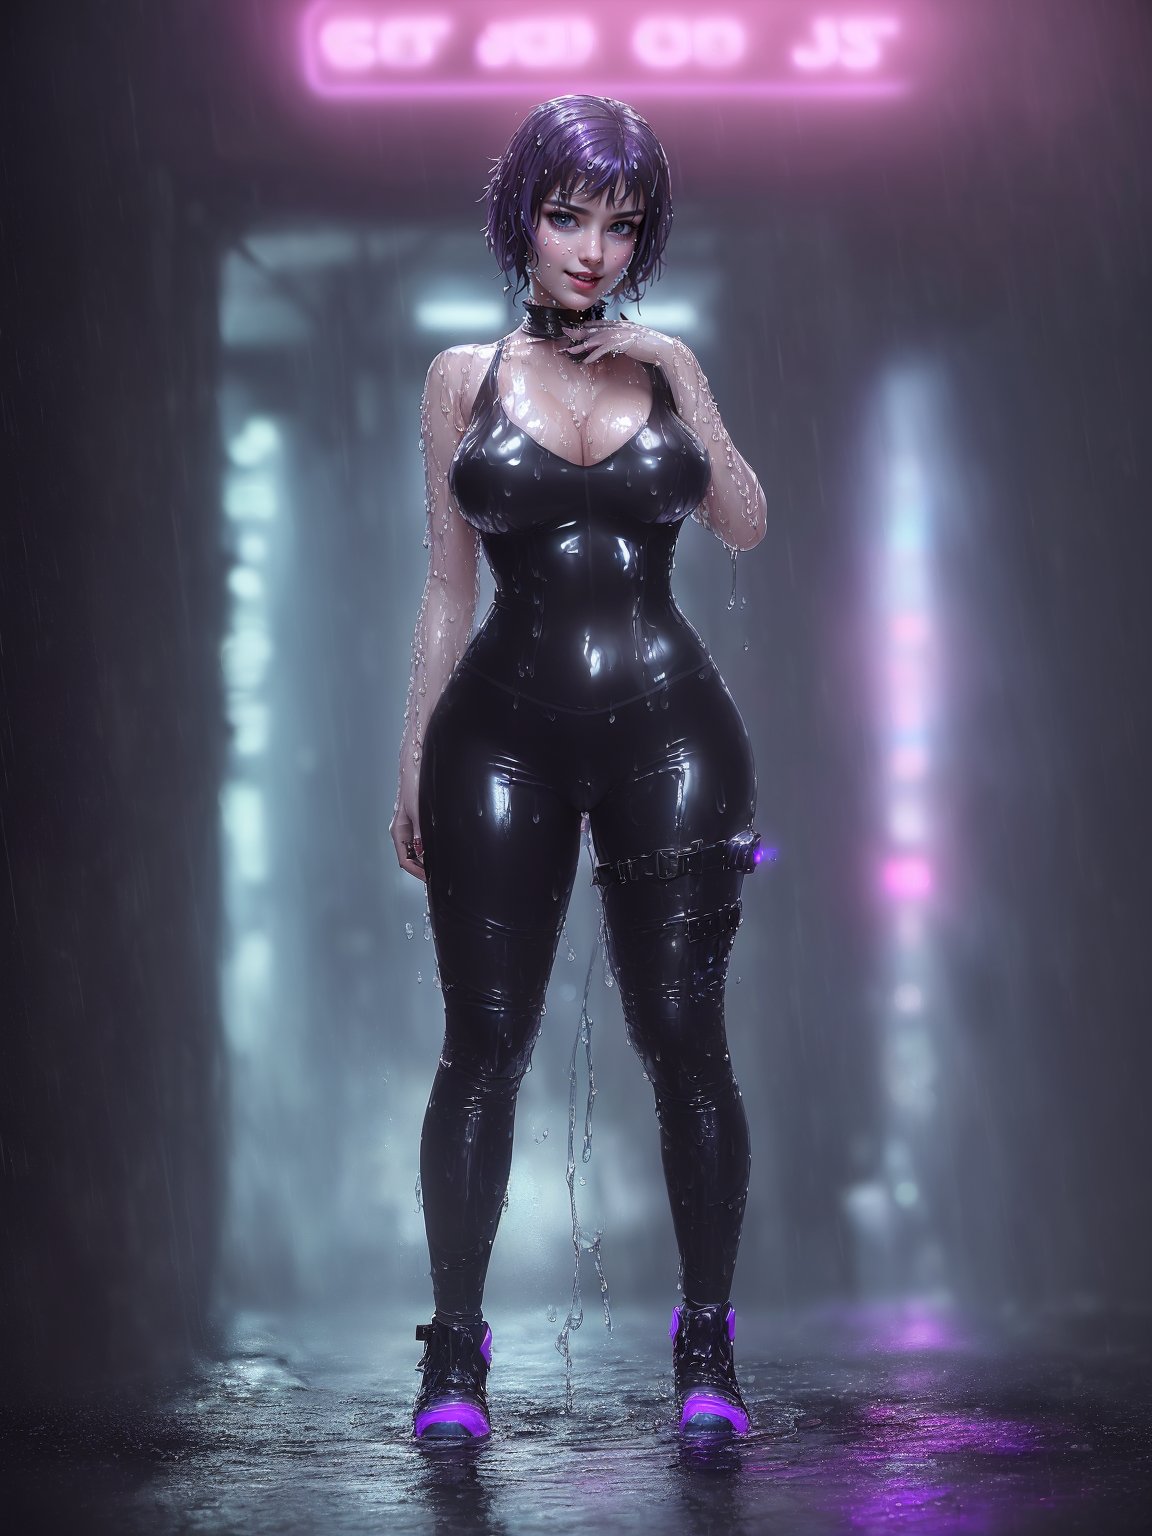 ((Full body):2) {((Solo/Just a 30 year old woman):2)}:{((wearing black cyberpunk costume with neon lights extremely tight and tight on the body, semi transparent):1.5), ((extremely large breasts):1.5), only she has ((very short purple hair, green eyes):1.5), ((looking at viewer, maniacal smile):1.5), She has ((body/attire all soaked in water):1.2) she is doing ((erotic pose):1.5)}; {Background:In a futuristic city raining heavily, she is (in the middle of a traffic of flying futuristic cars):1.5)}, Hyperrealism, 16k, ((best quality, high details):1.4), anatomically correct, masterpiece- press, uhd